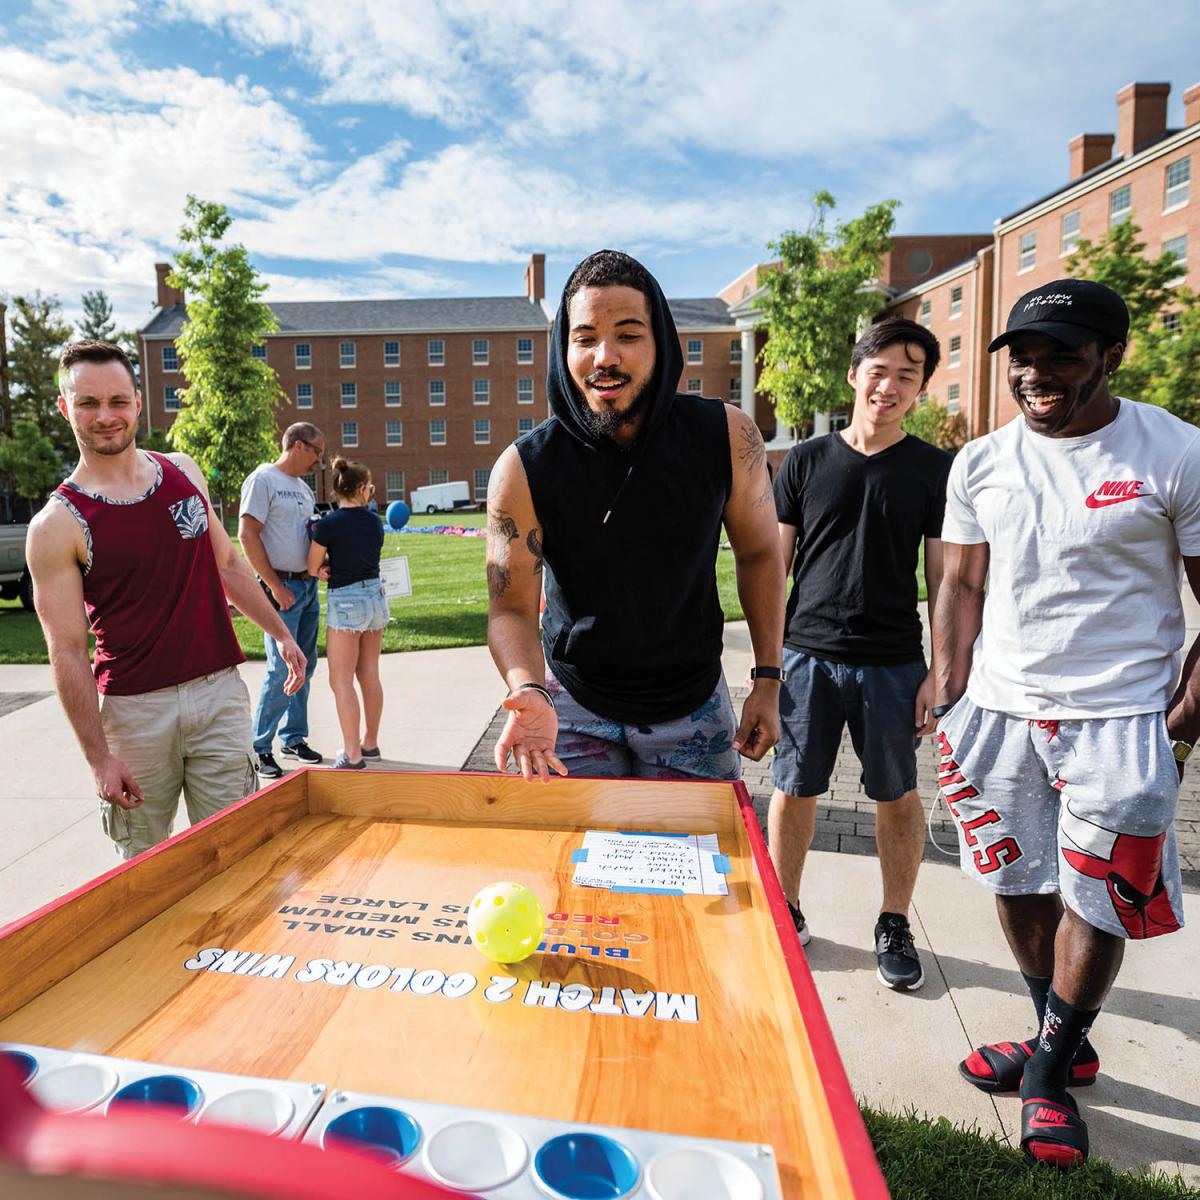 Students were excited to see the return of Doo Dah Day this spring. Trey King ’17 competes in one of the many games set up for students near Harrison Hall.